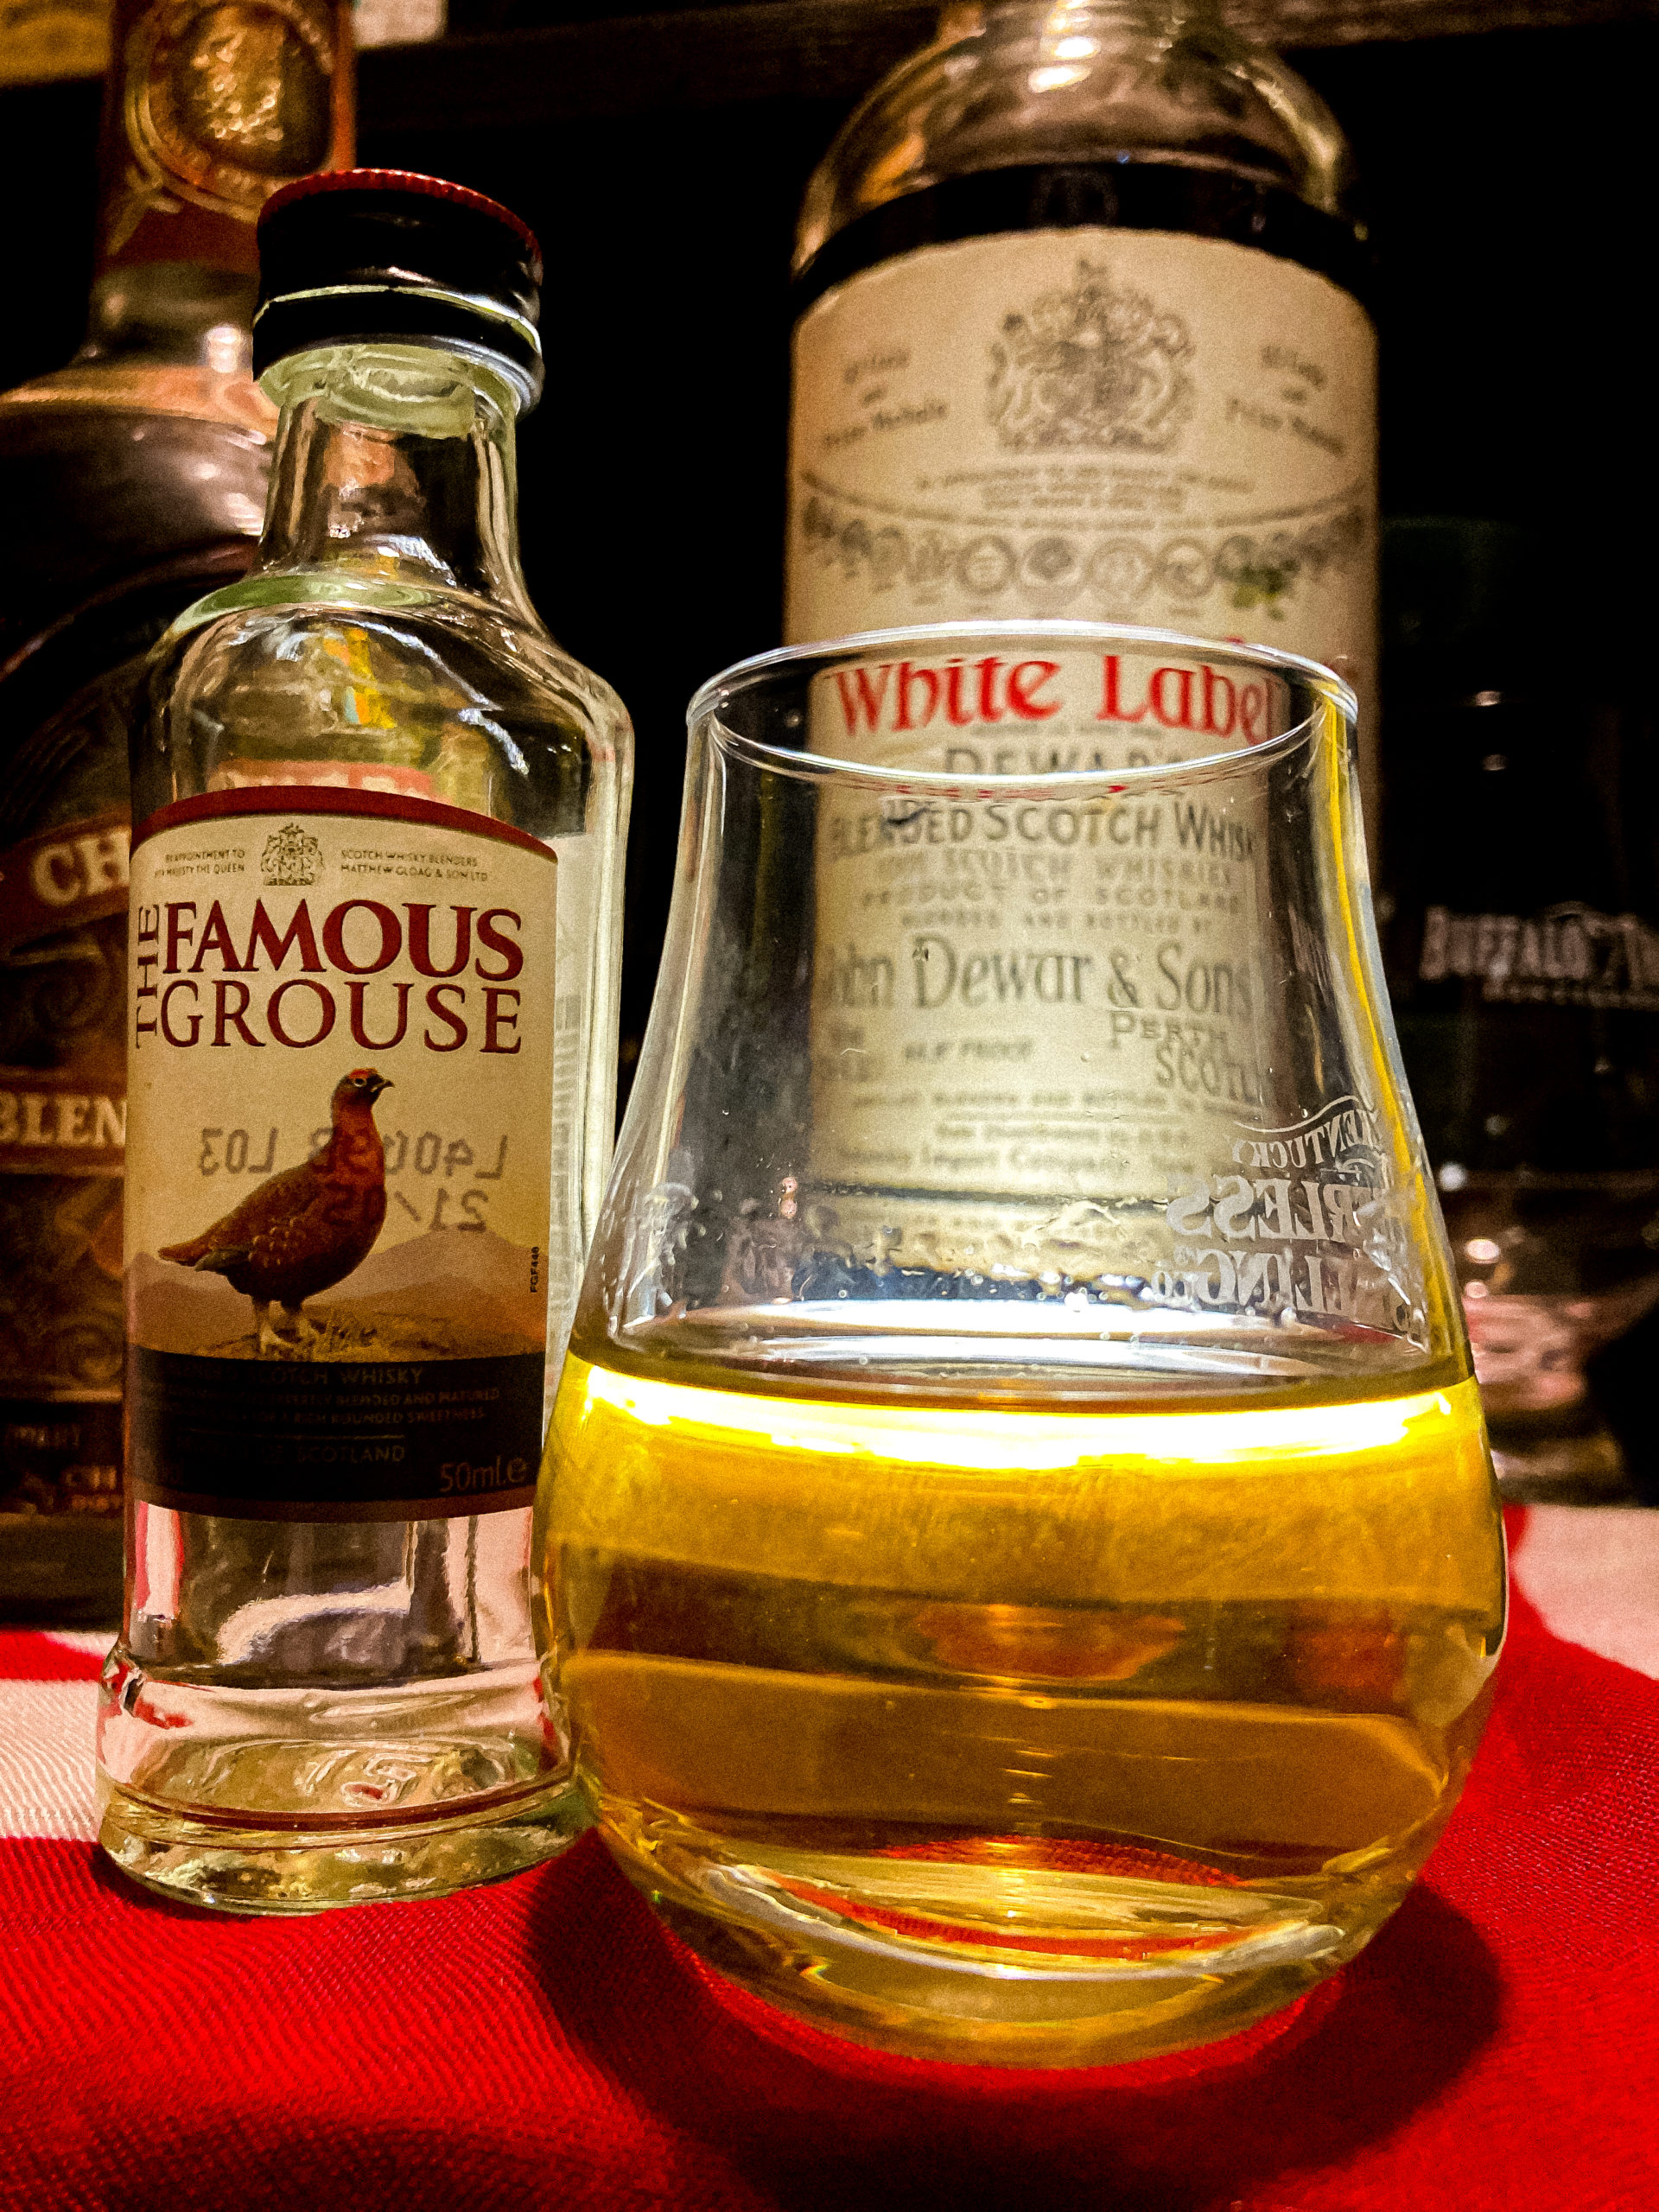 Review #409 – The Famous Grouse